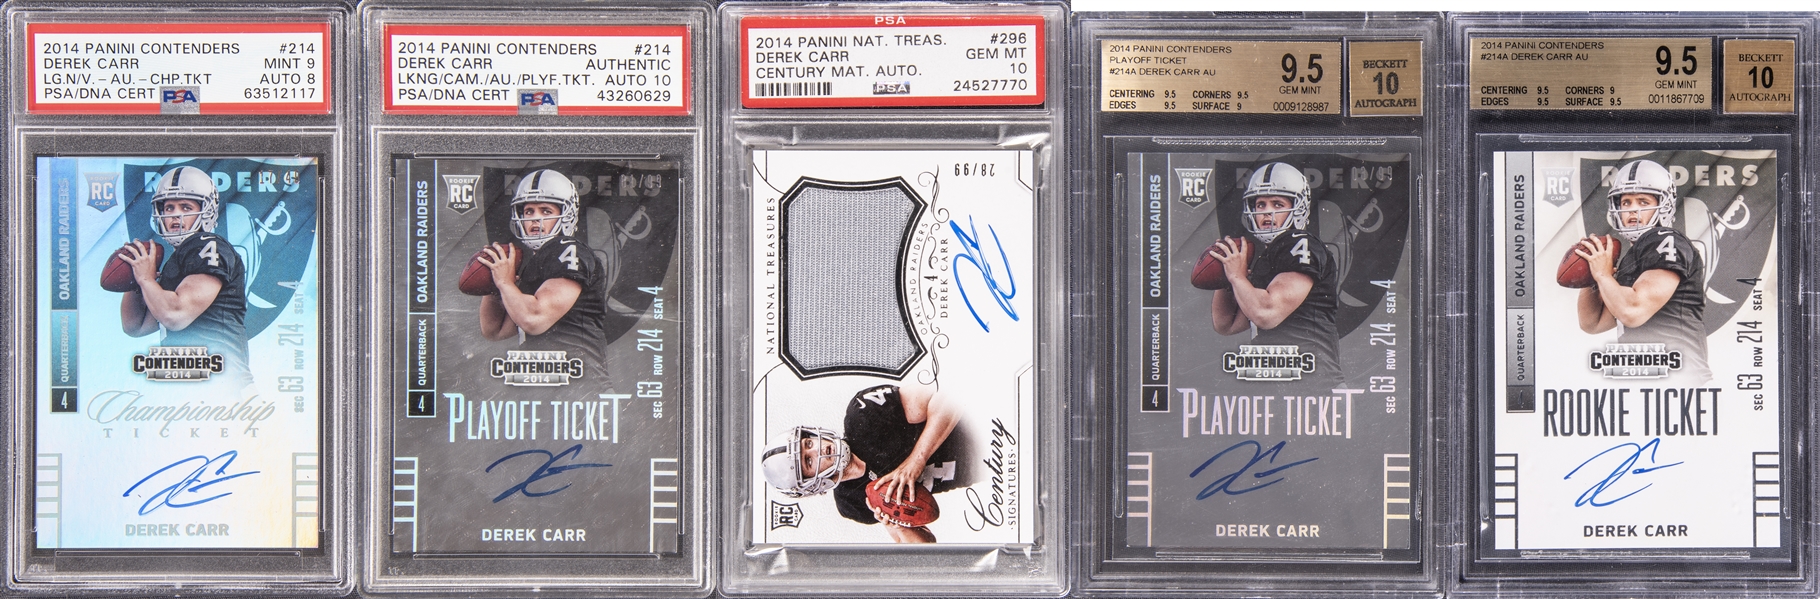 2014 Panini Derek Carr PSA/BGS-Graded Signed Rookie Cards Quintet (5) – Including Two GEM MINT Serial-Numbered Examples!